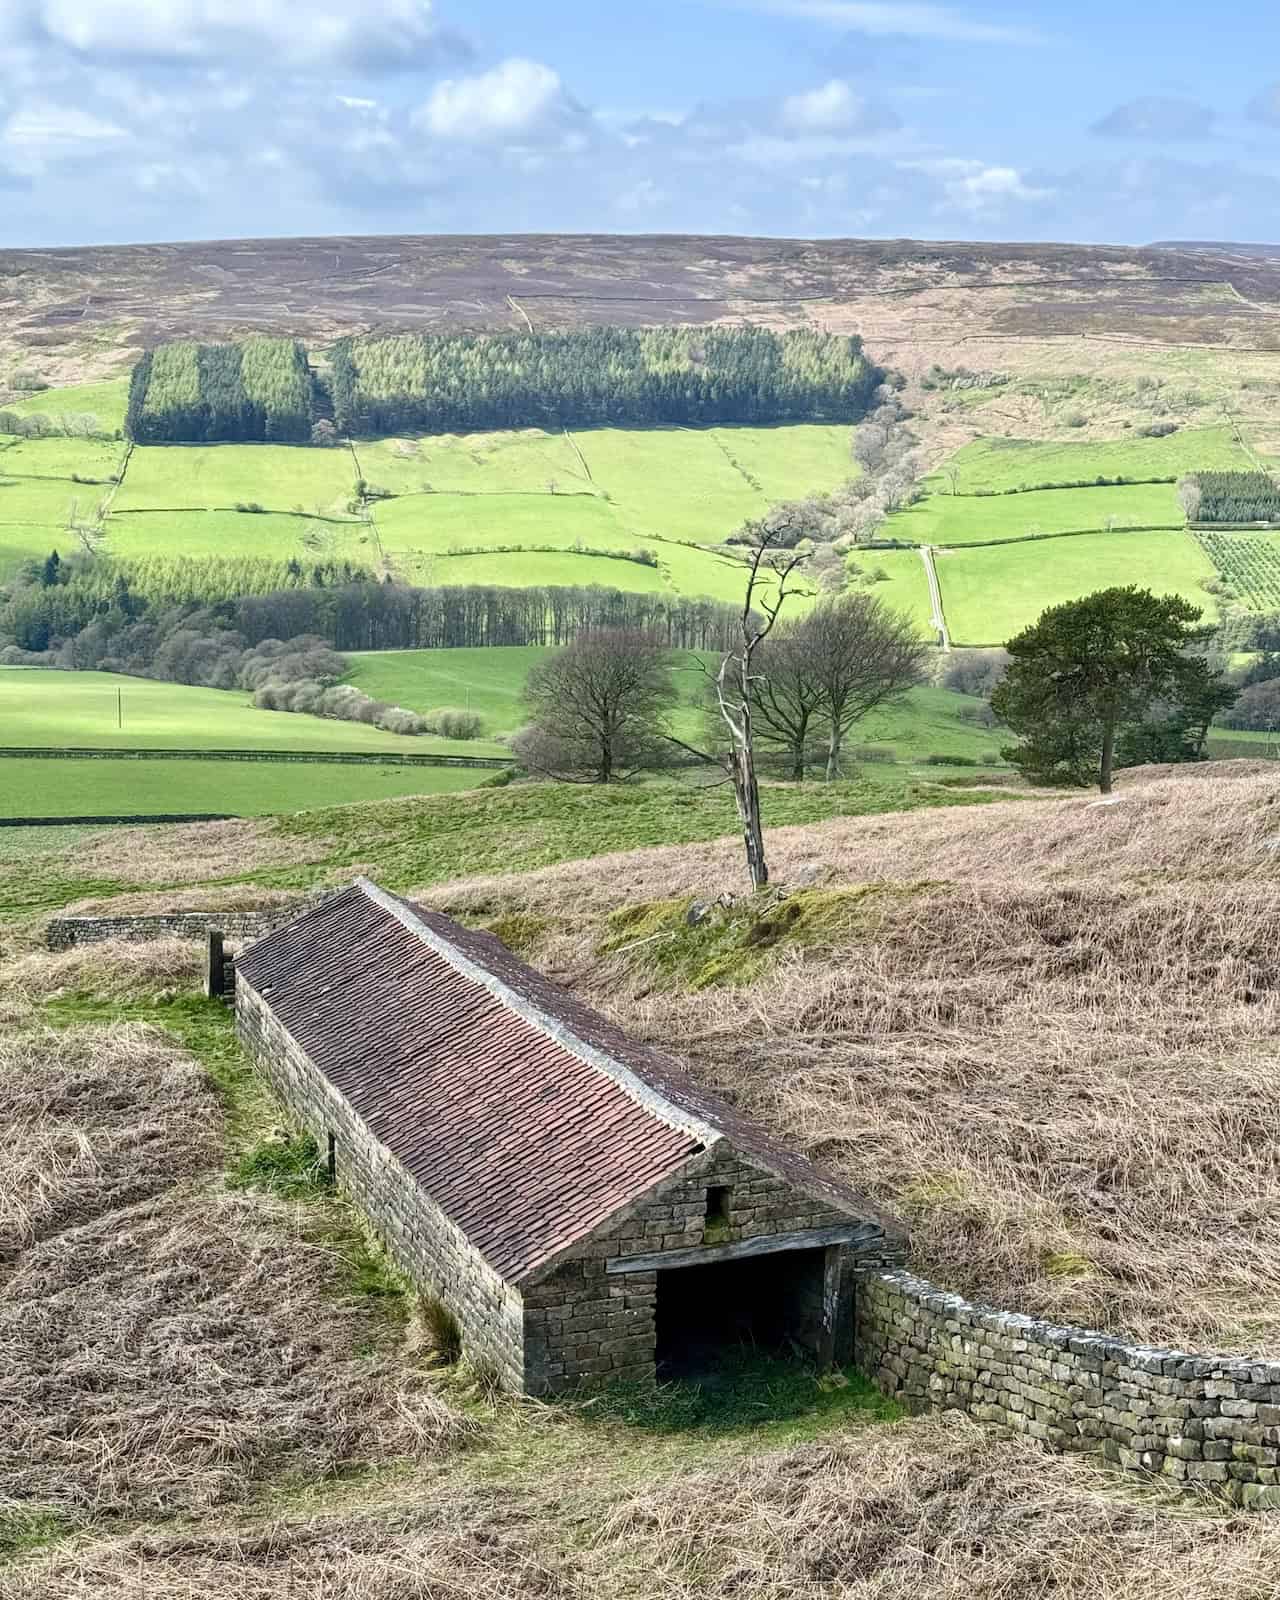 Excellent views west across the Bilsdale valley towards Cold Moor from the location of an old barn near Medd Crag.